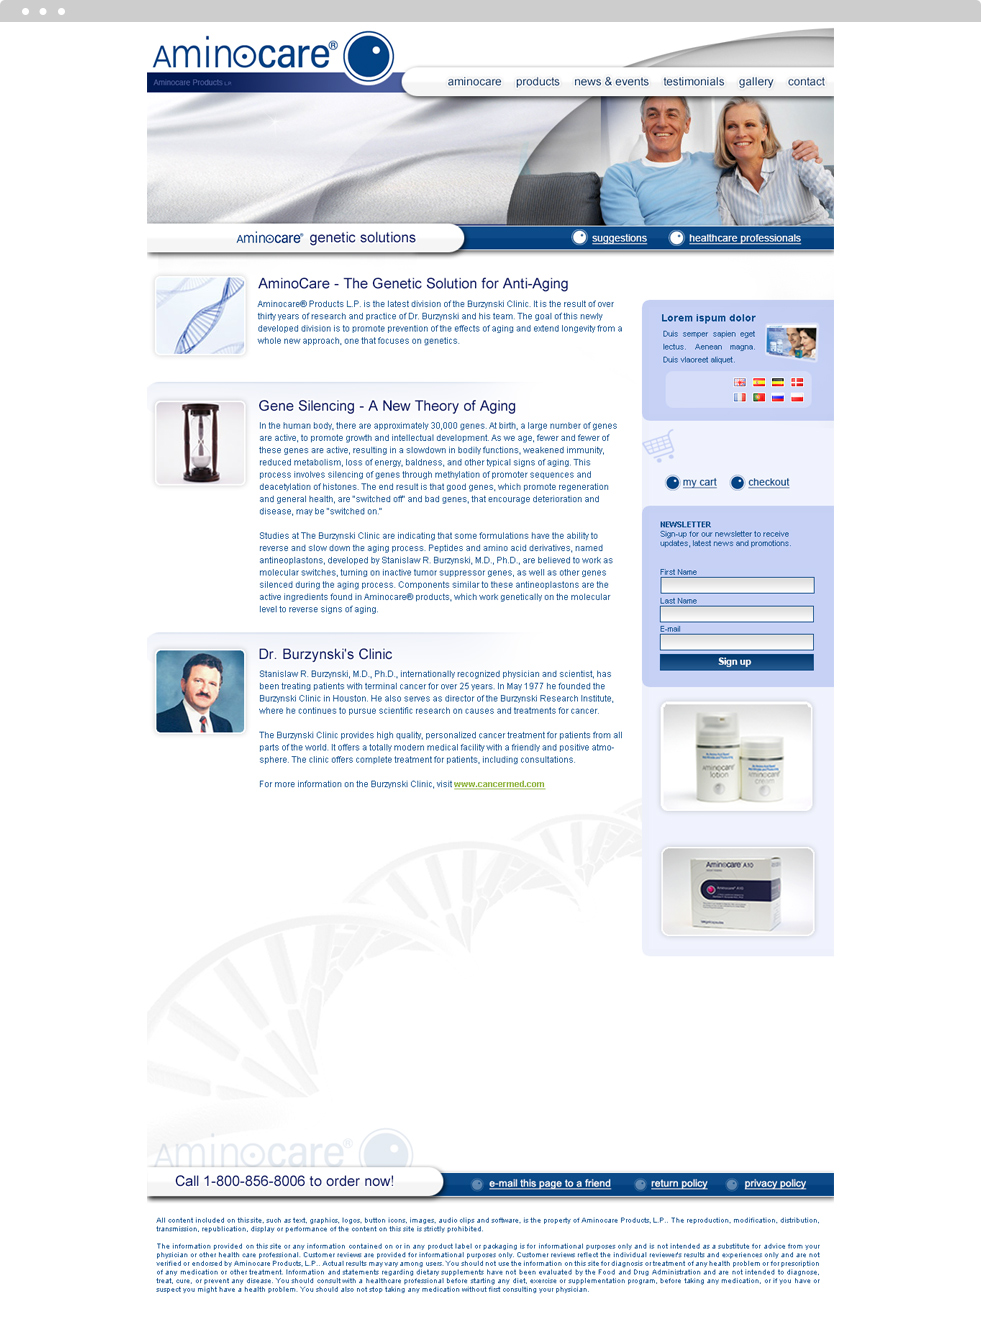 Medical Products Website Design - Aminocare - Homepage